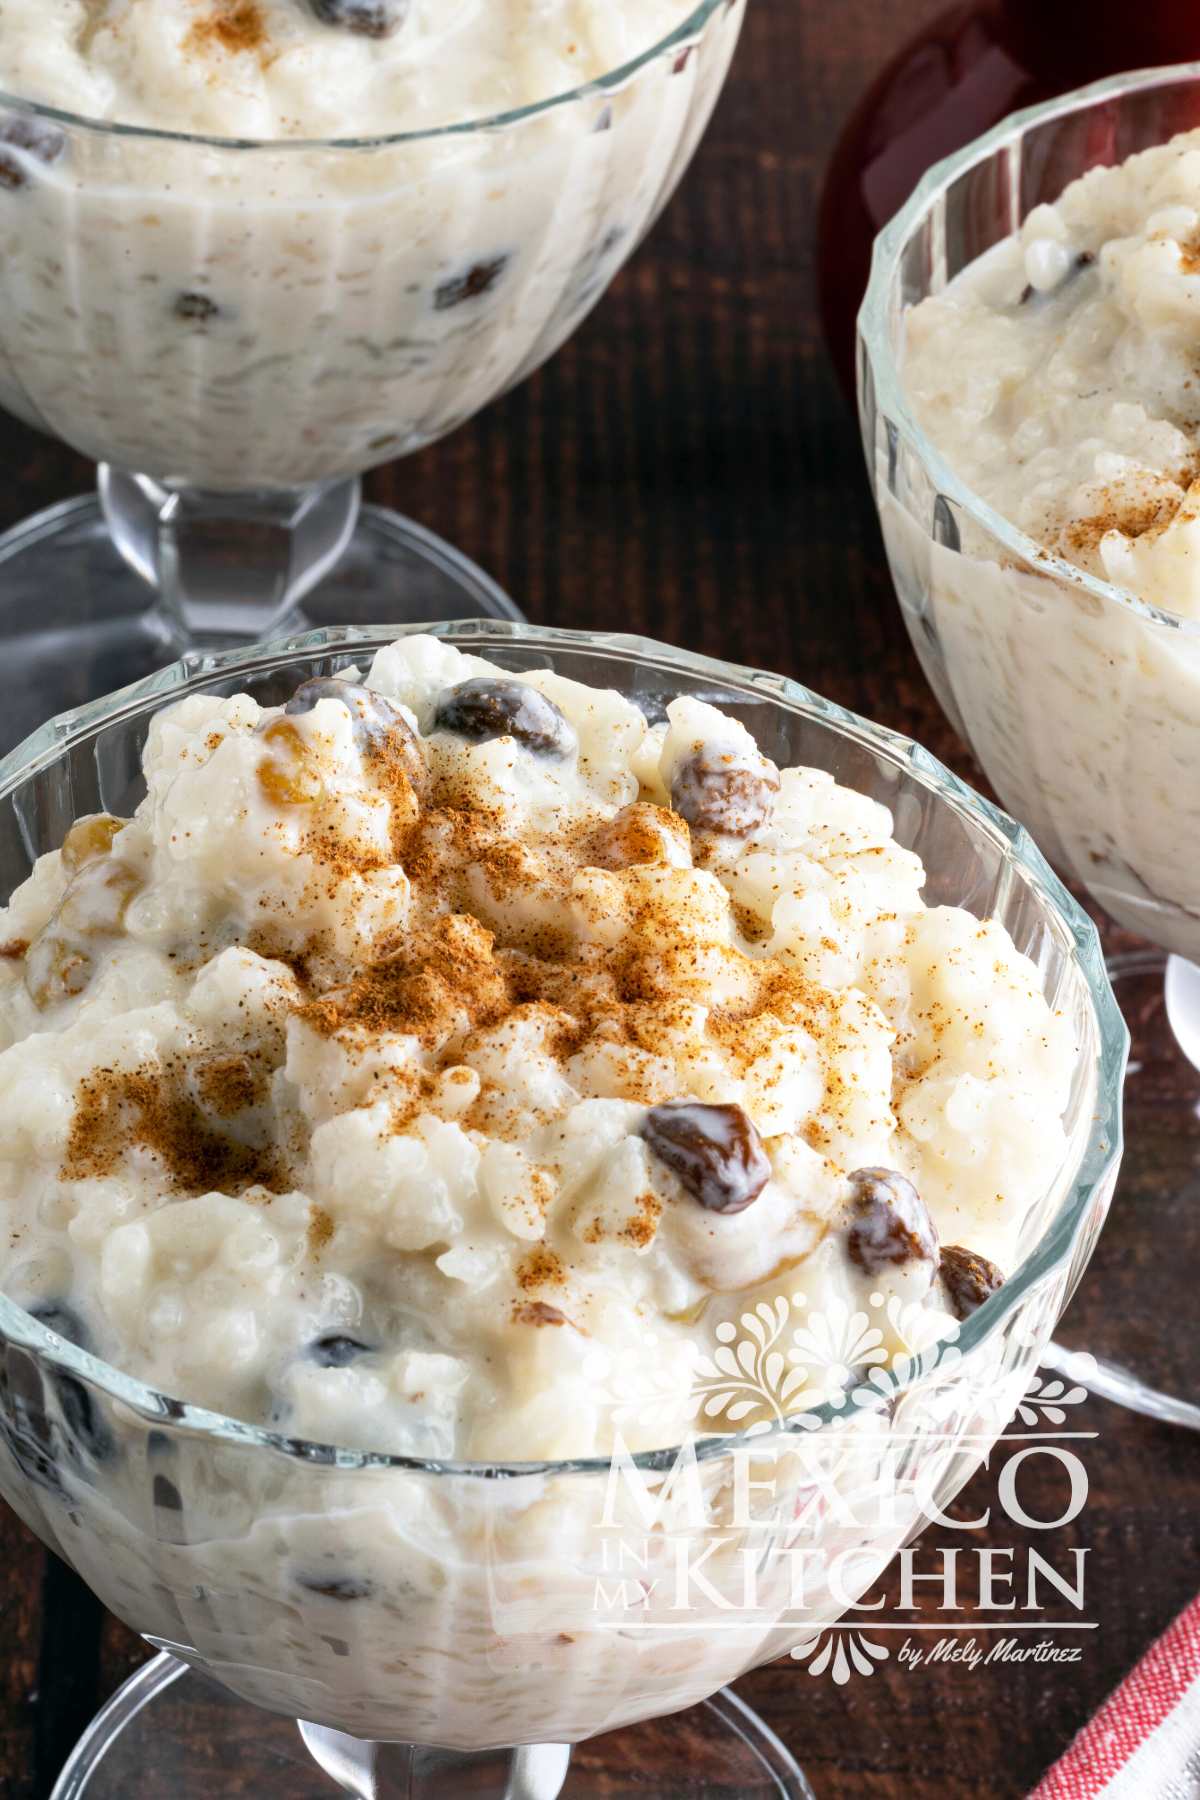 Arroz con leche in serving bowls, sprinkled with cinnamon.